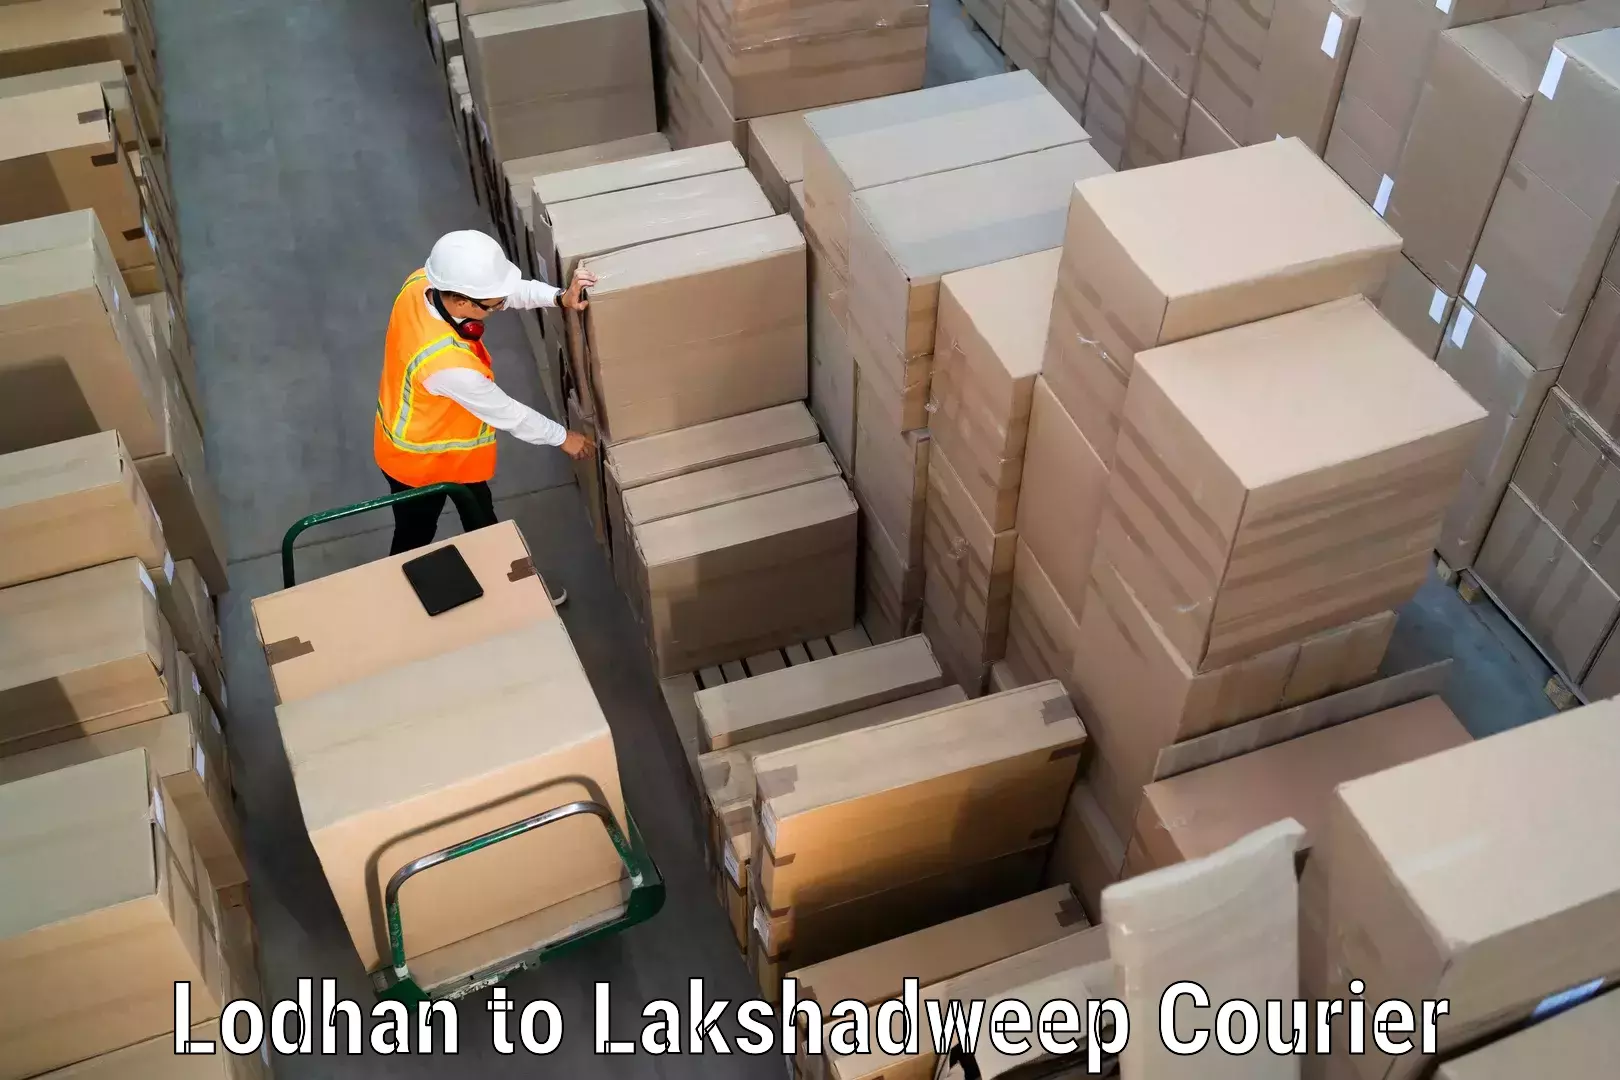 State-of-the-art courier technology Lodhan to Lakshadweep